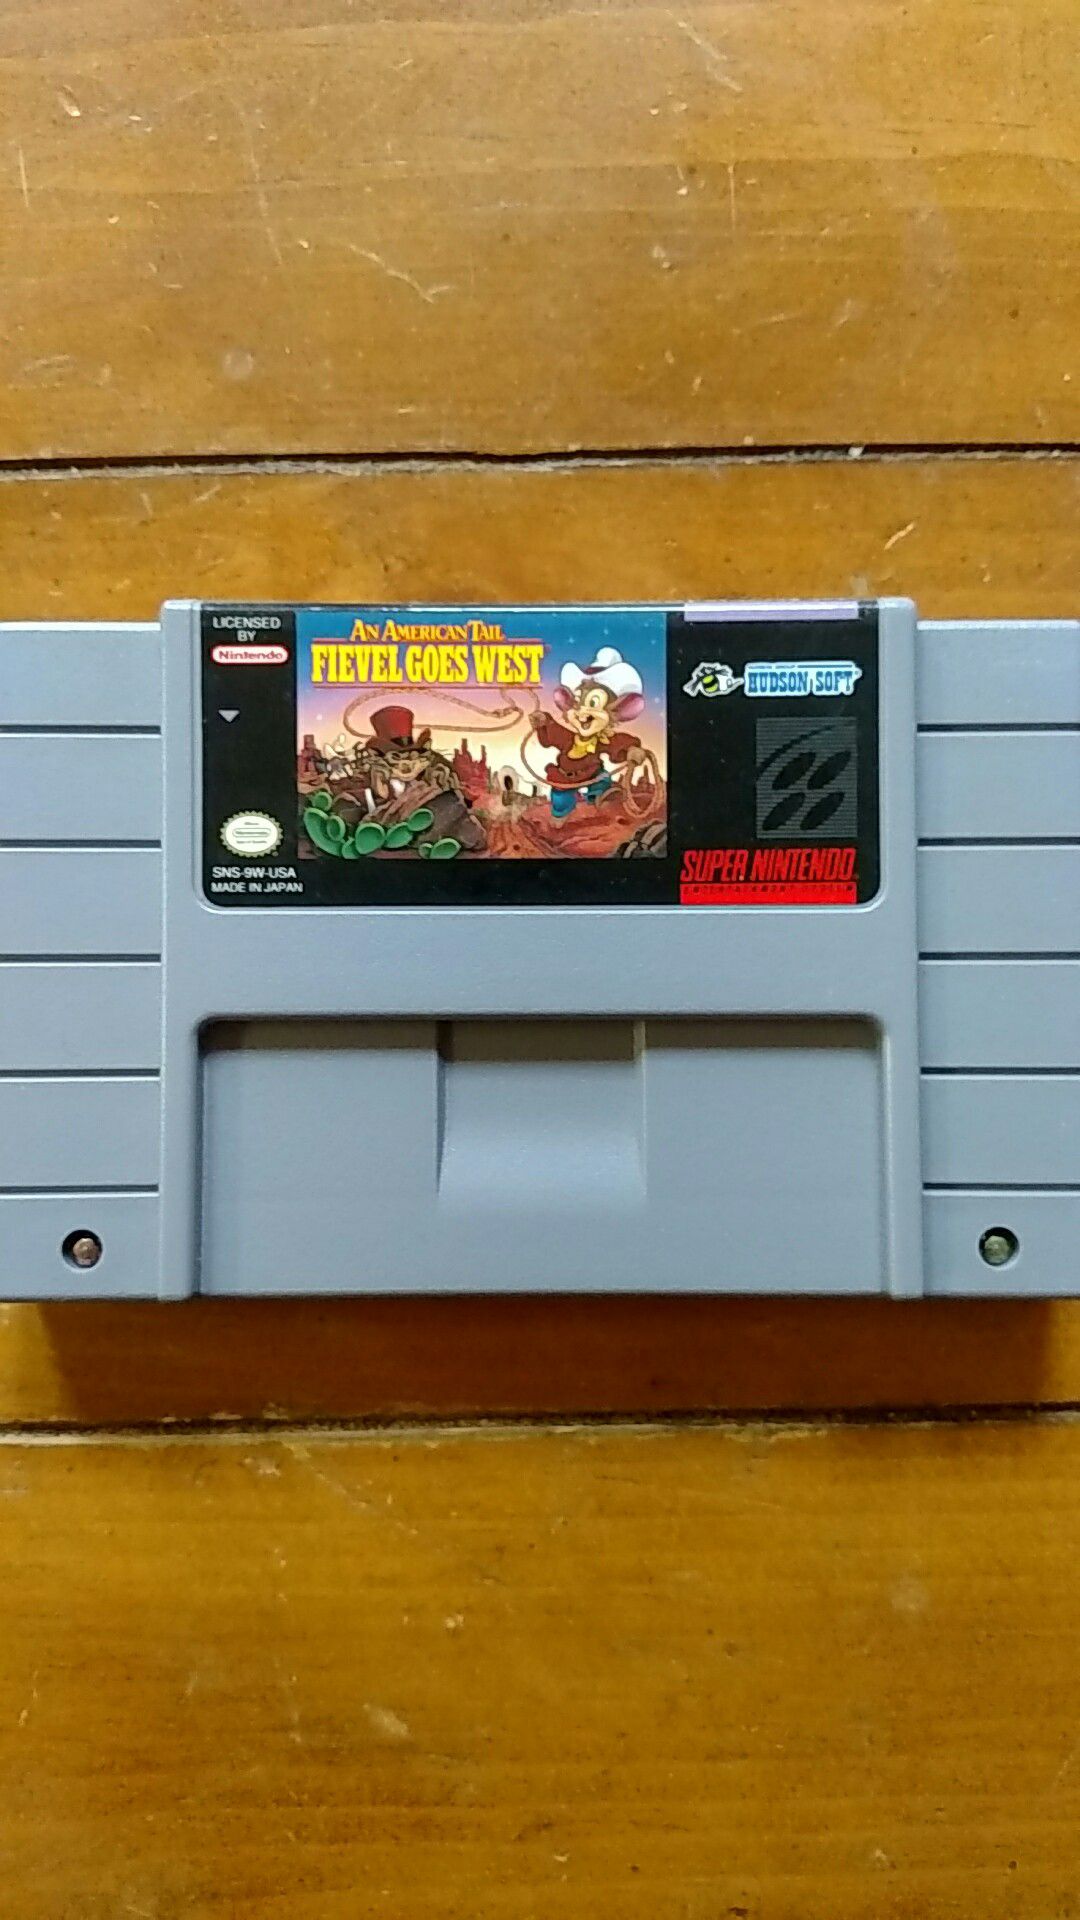 An American Tail Fievel Goes West SNES